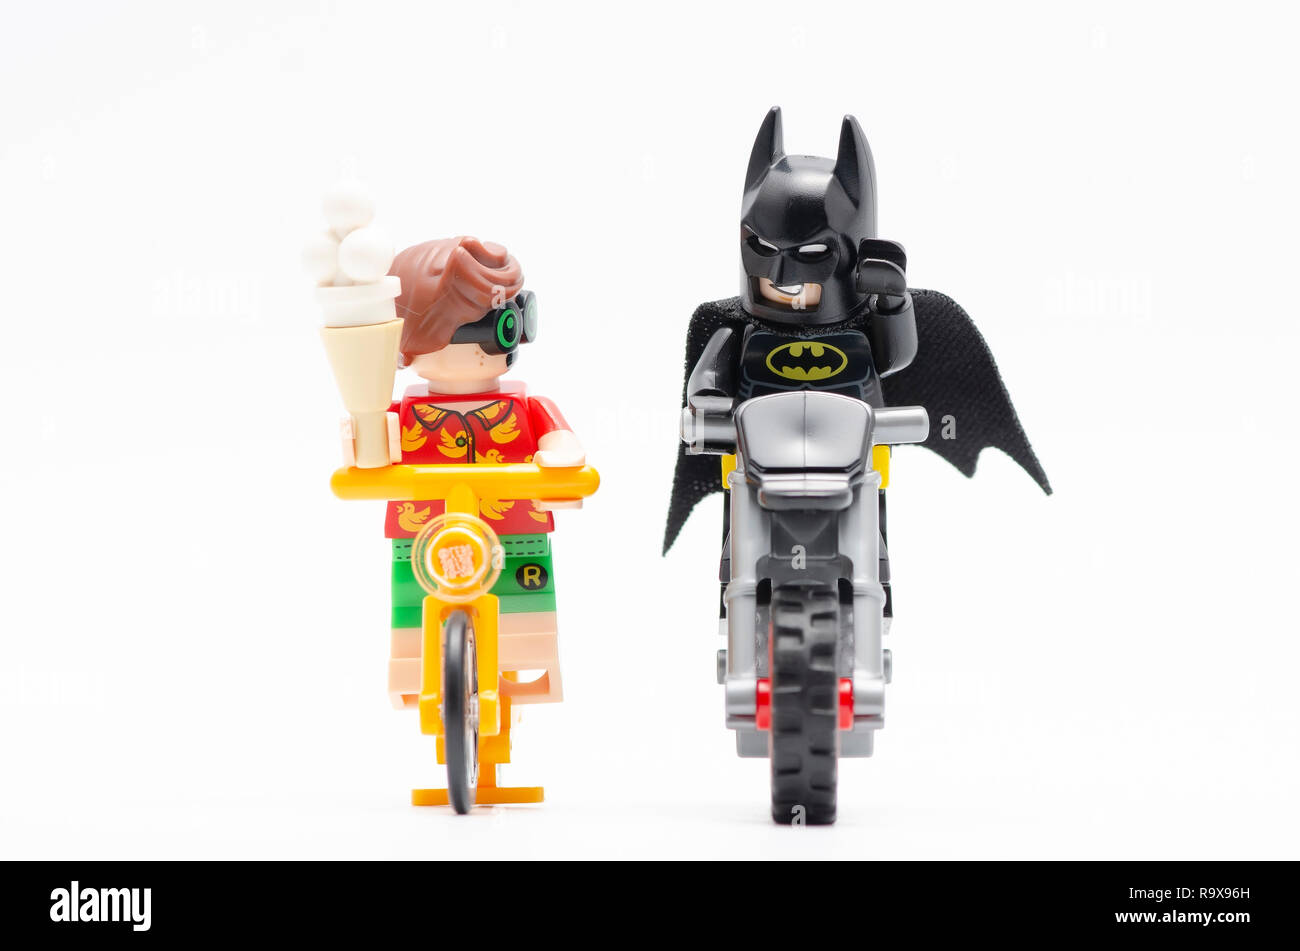 lego batman with robin riding bicycle with radio at his back and holding a  ice cream. Lego minifigures are manufactured by The Lego Group Stock Photo  - Alamy